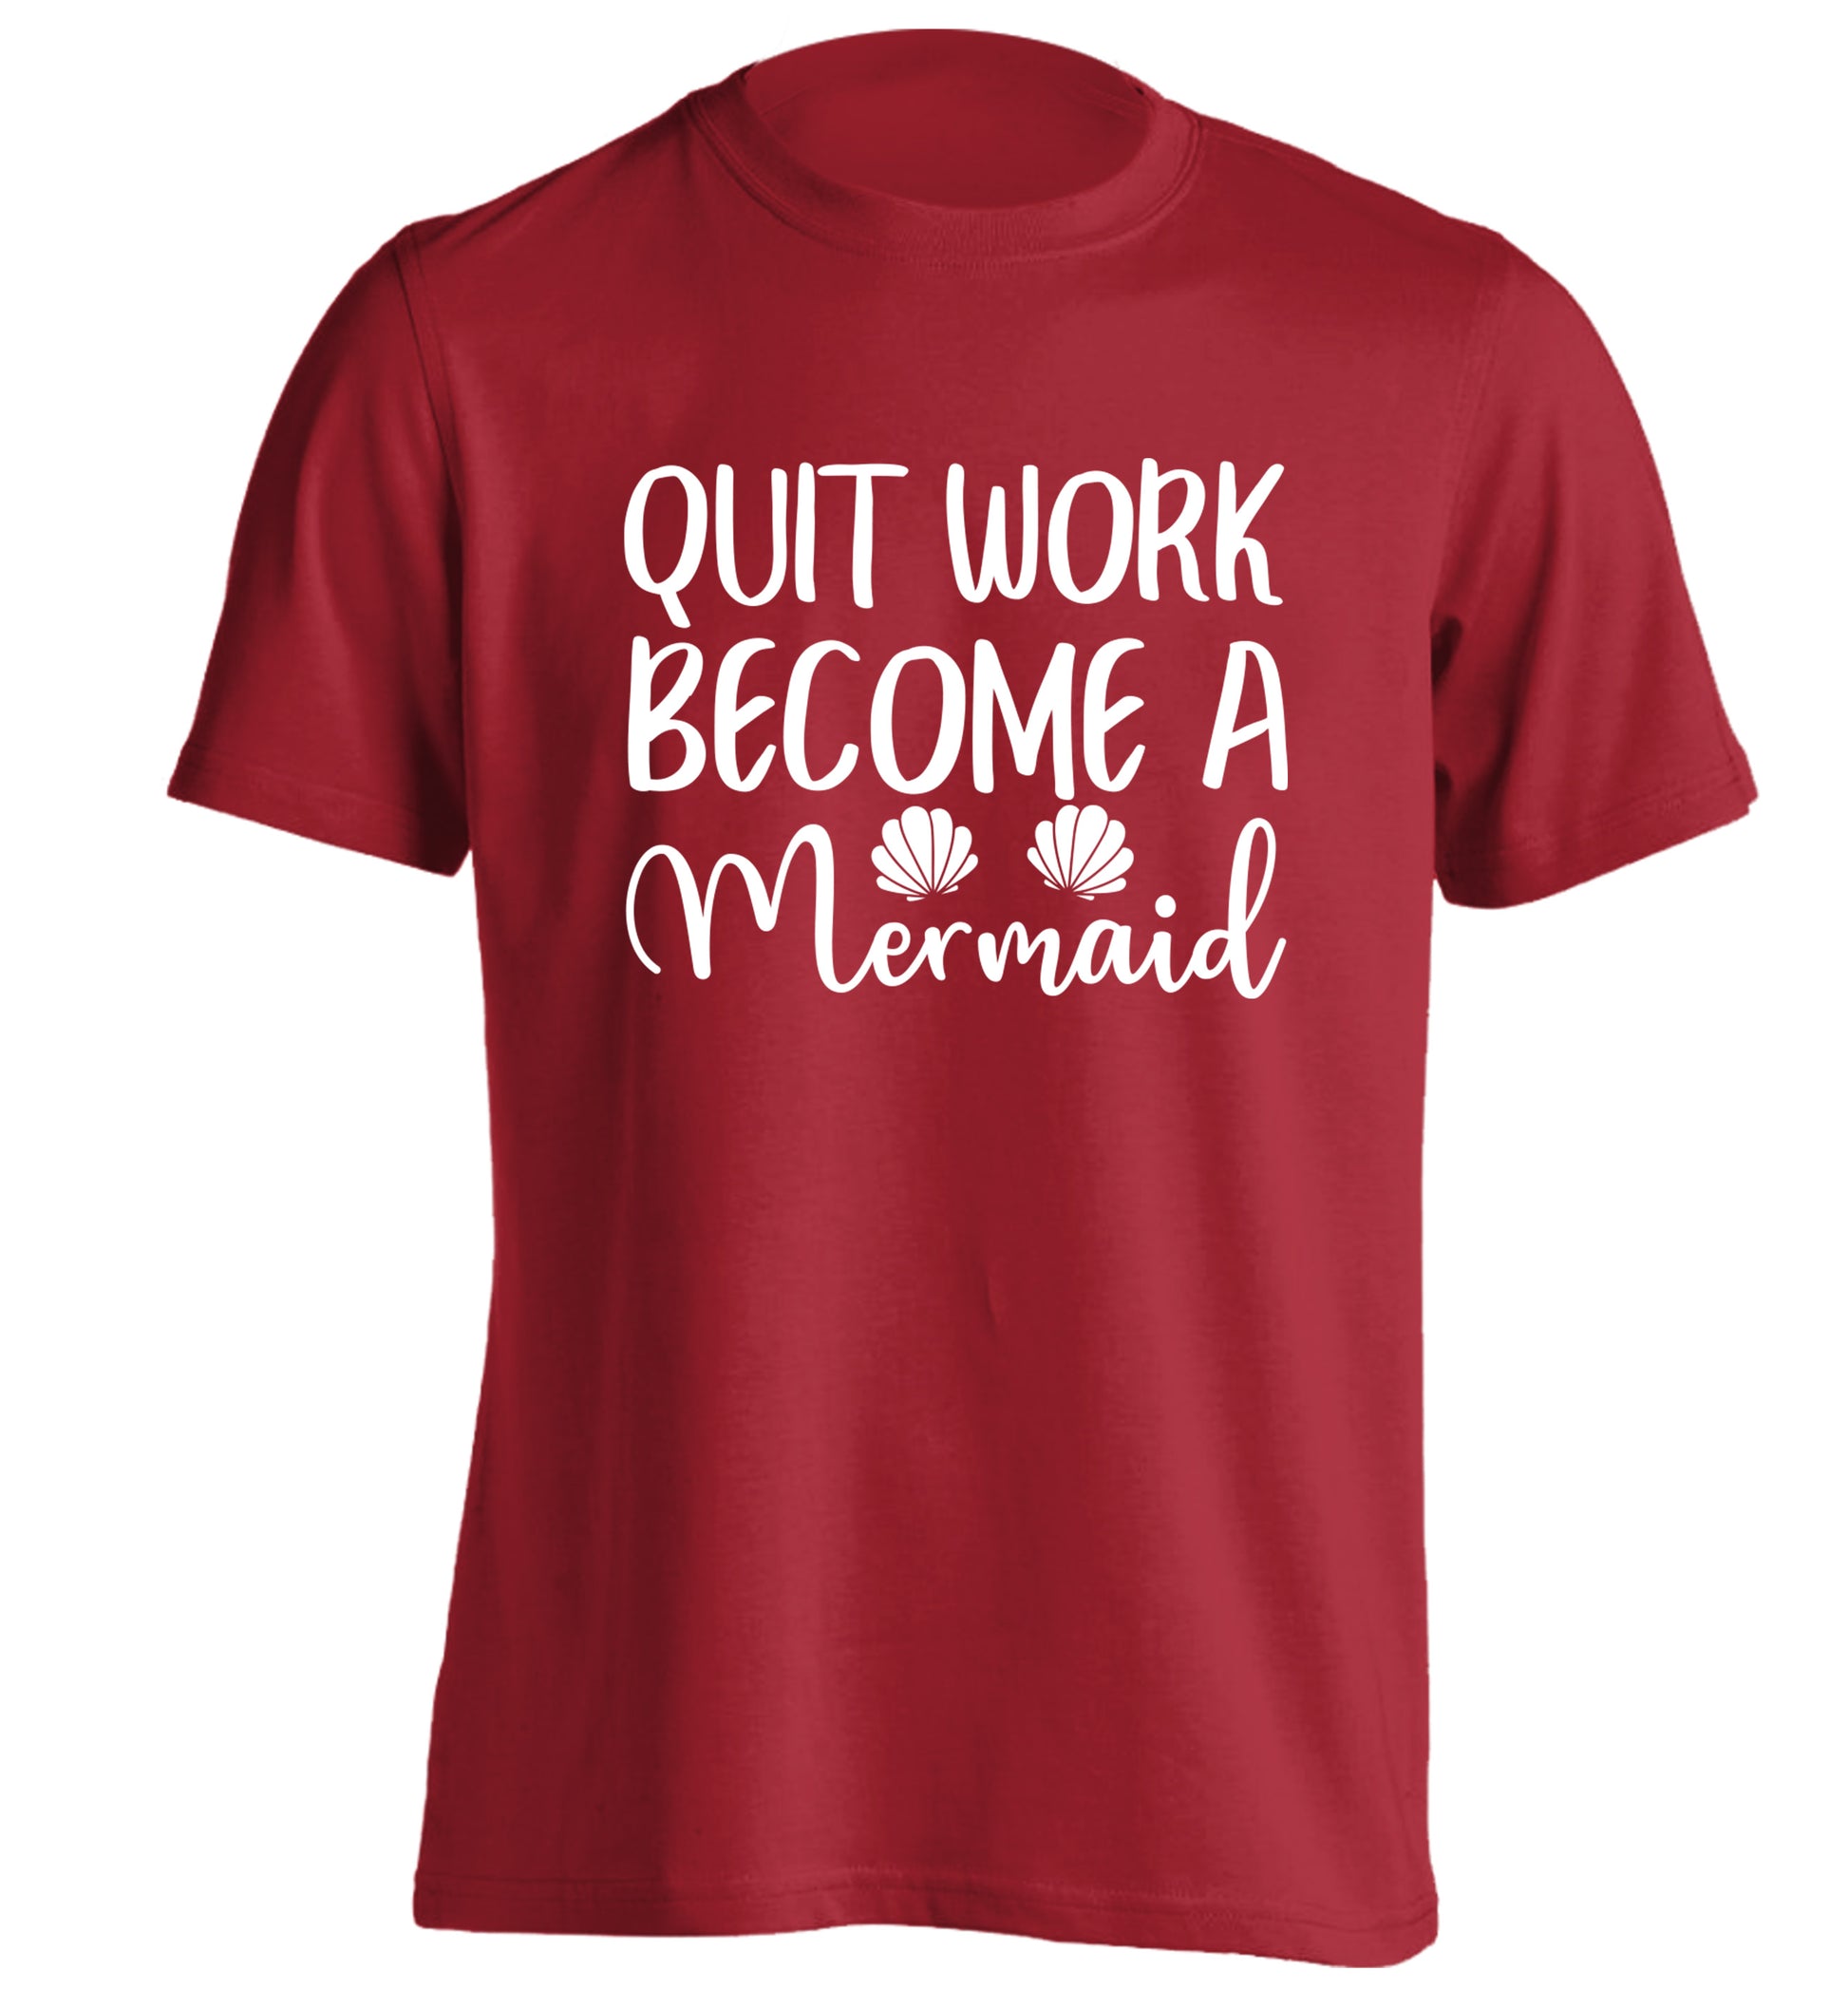 Quit work become a mermaid adults unisex red Tshirt 2XL